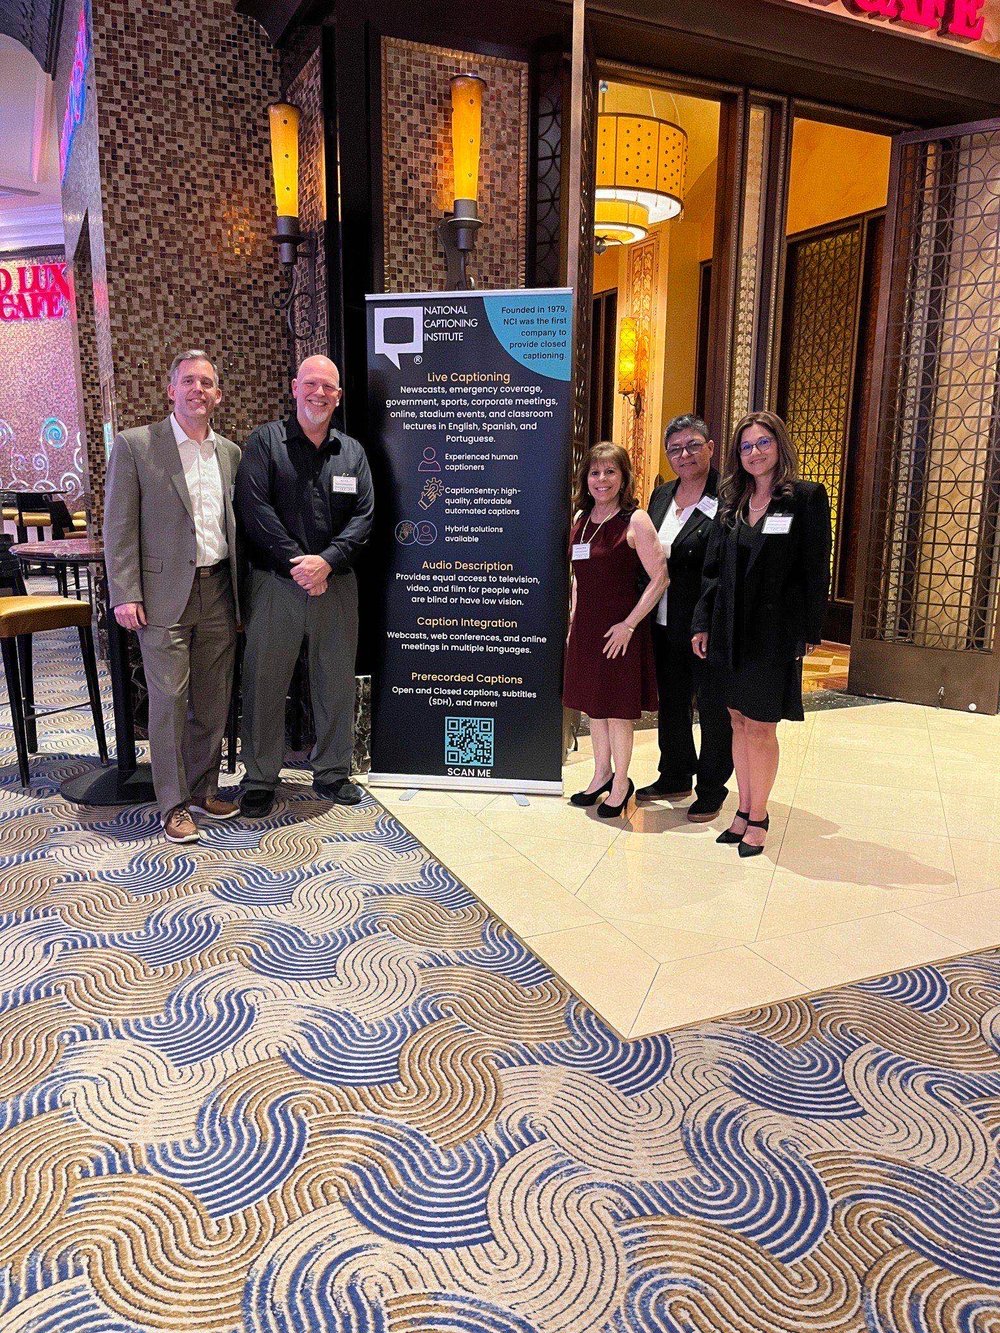 Our team outside the Grand Lux Cafe before the NCI reception.